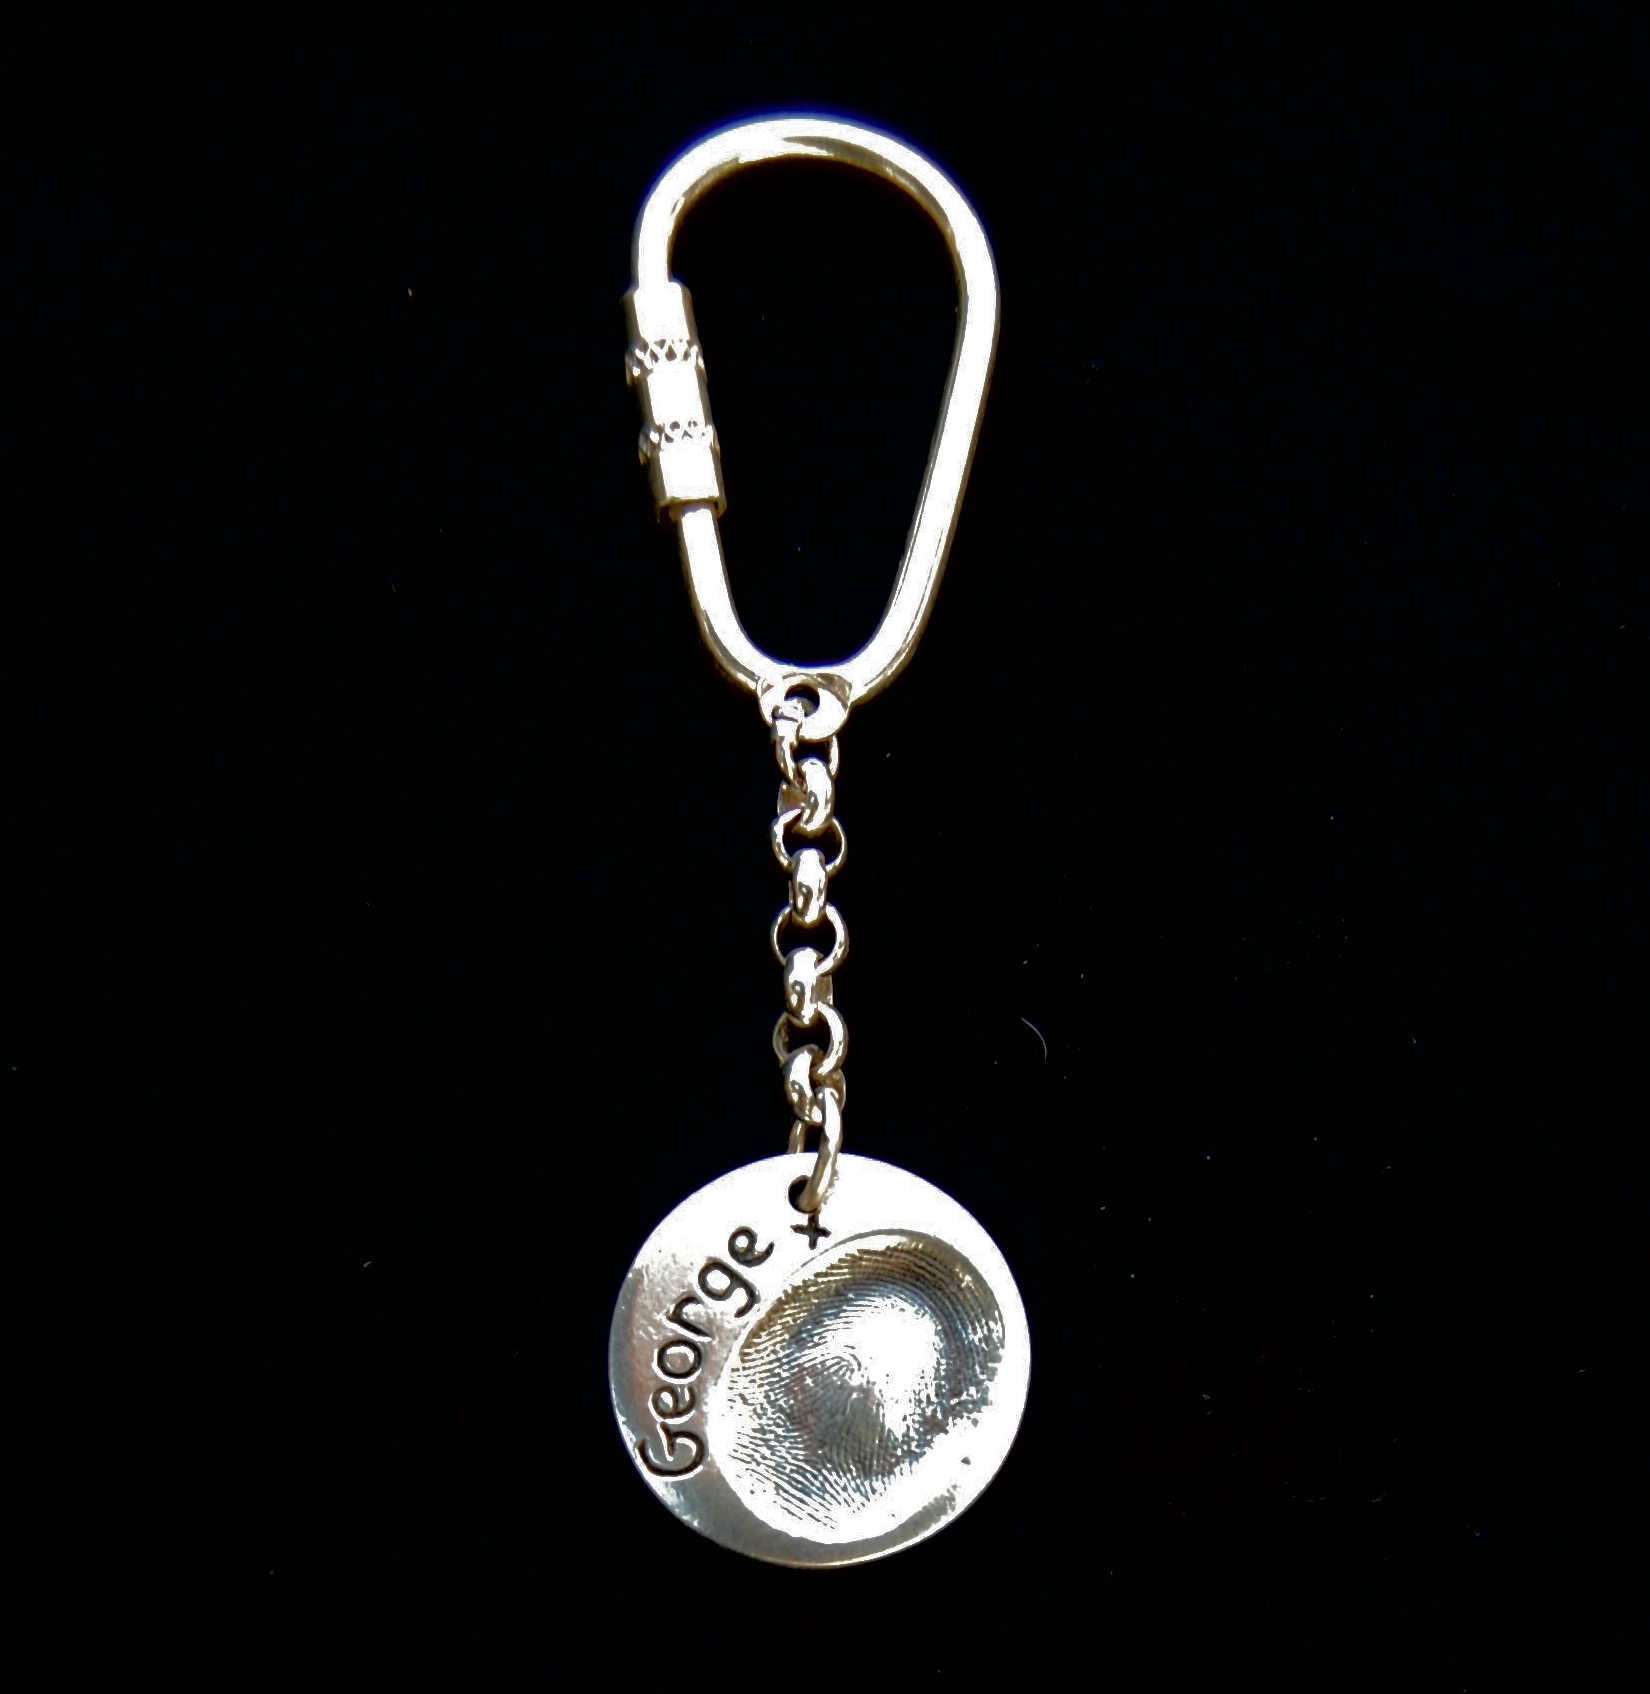 Silver oval keyring with personalised message hand inscribed in the silver.